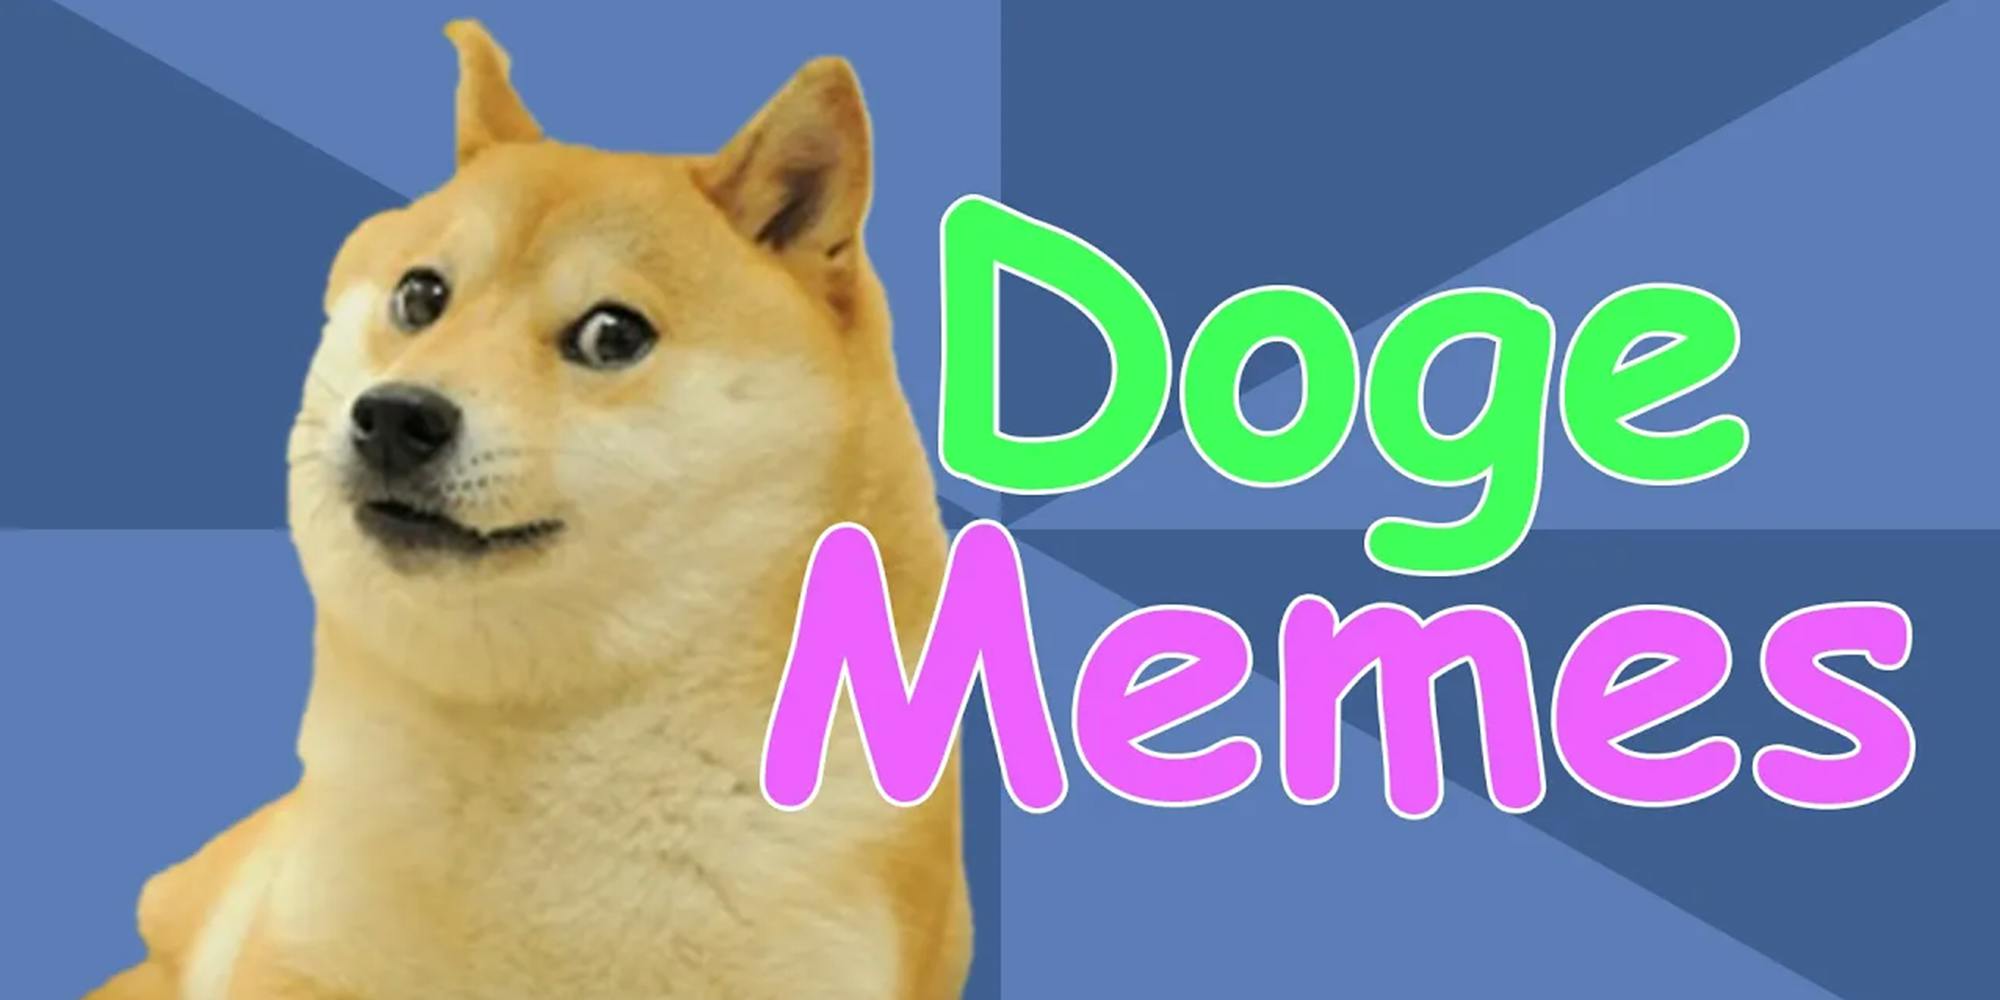 Doge Memes: A Complete History of Shiba Inu-Inspired Memes